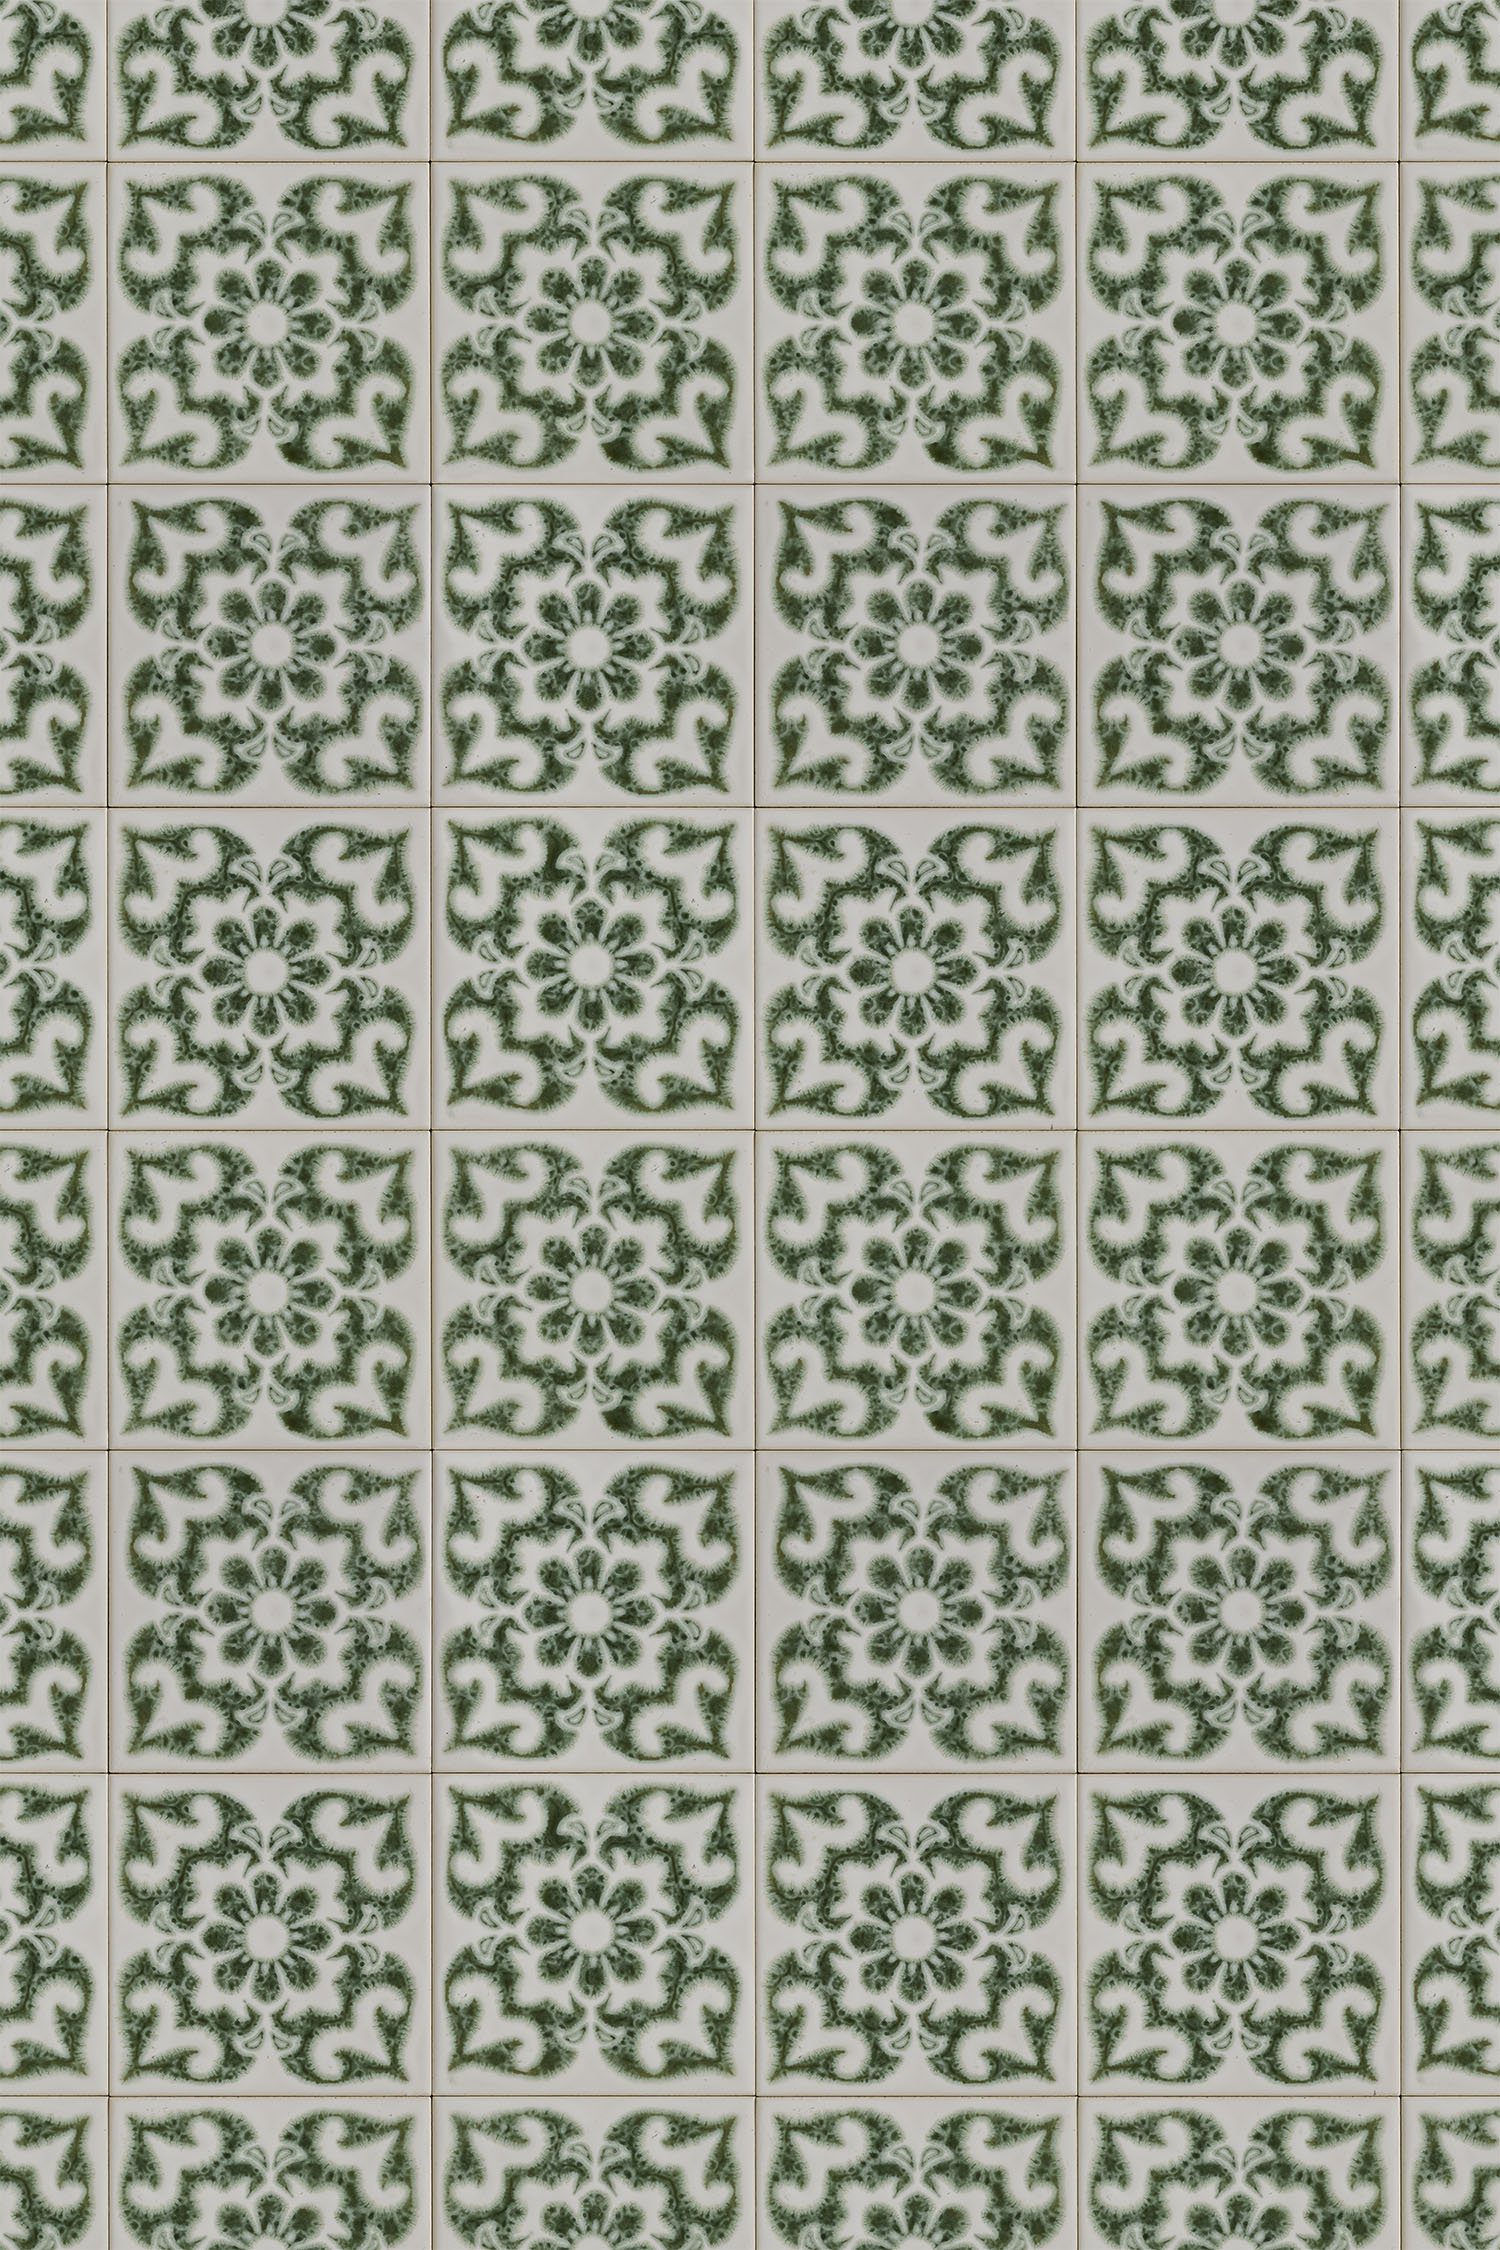 Vinyl background with white tiles and a dark green flower pattern